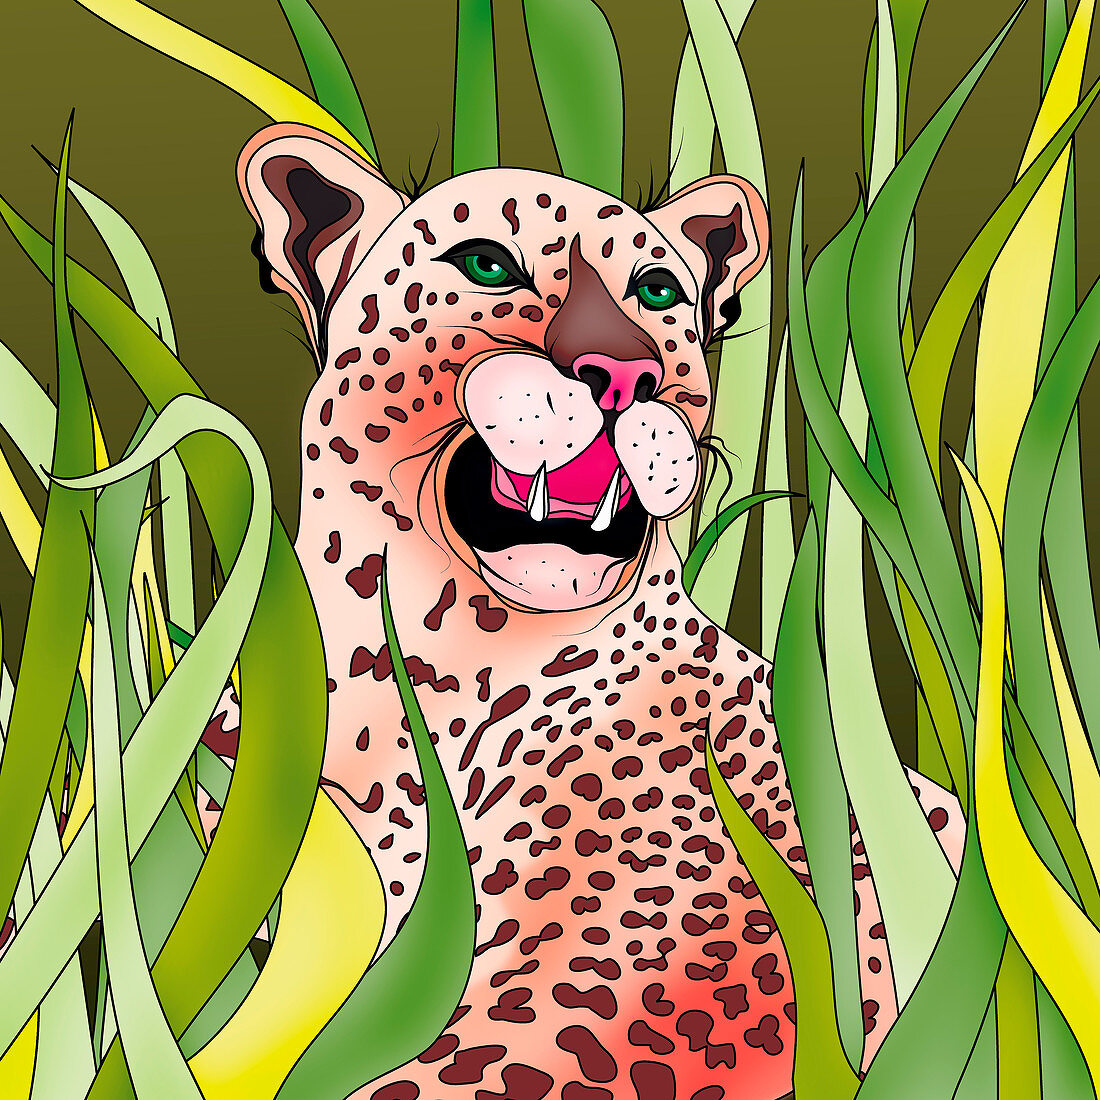 Leopard laying in tall grass, illustration